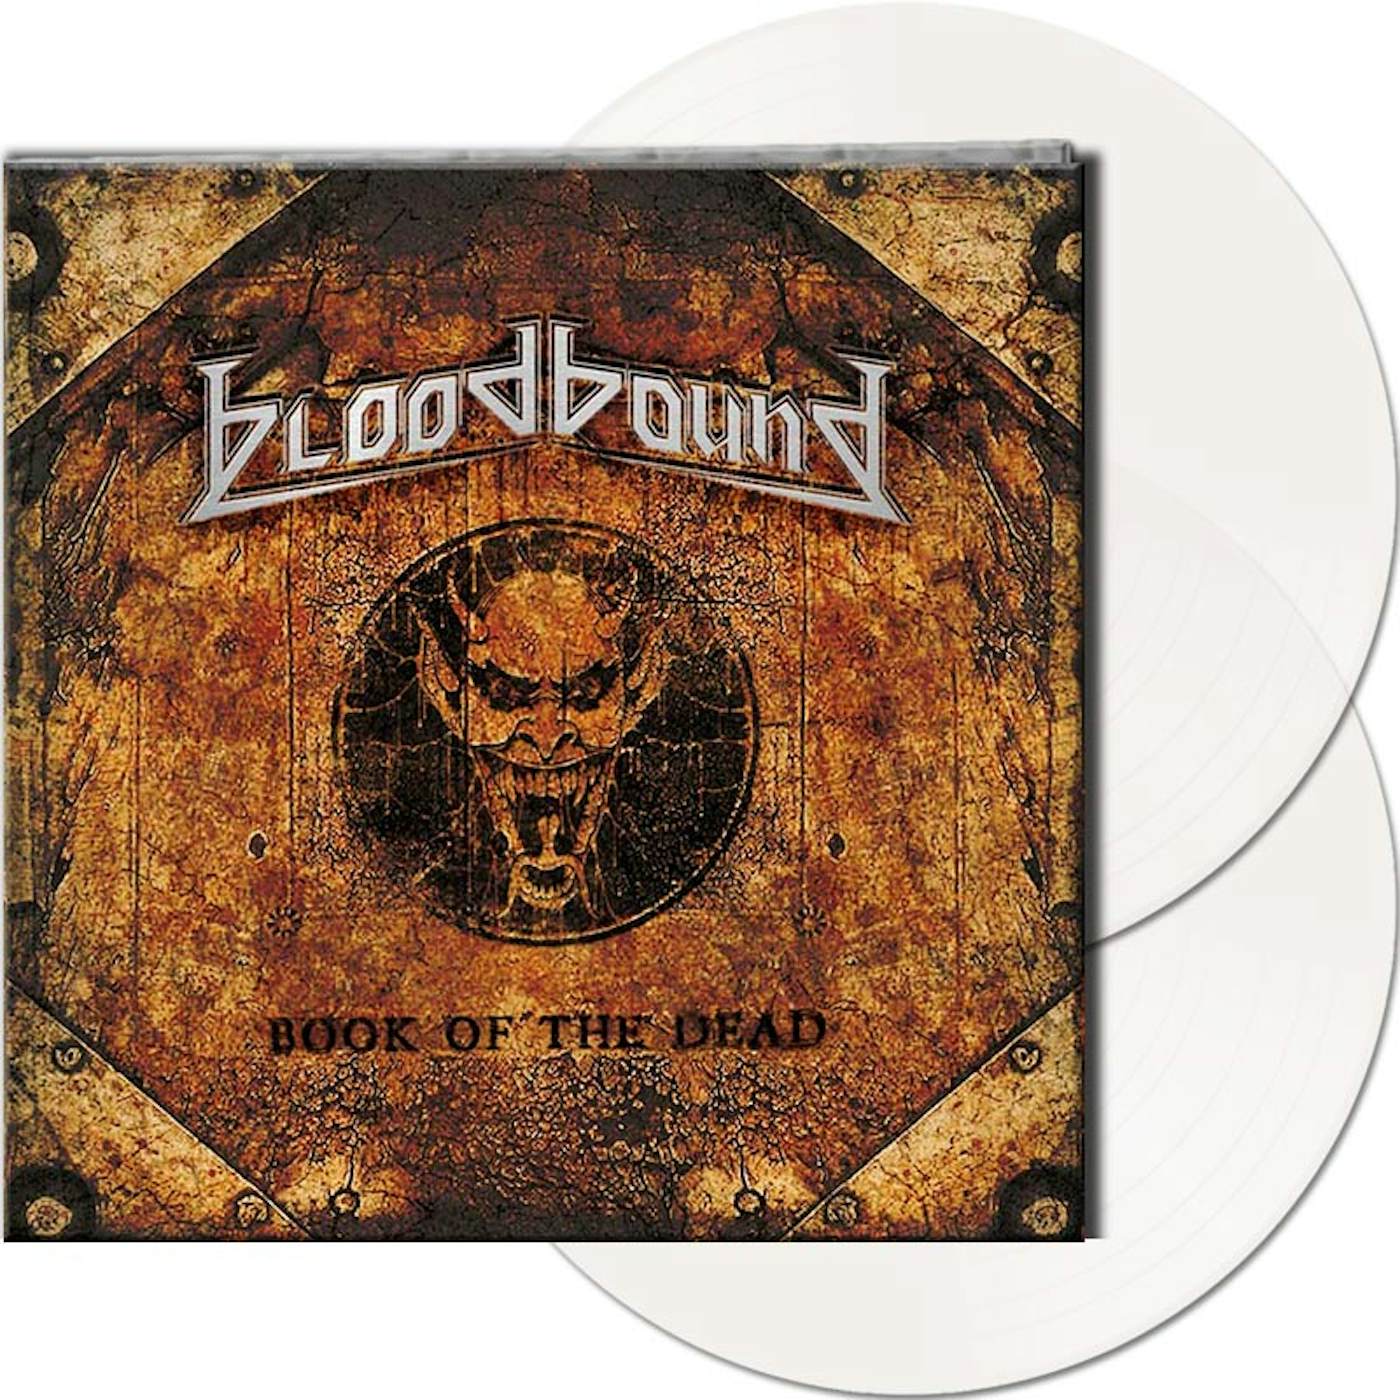 Bloodbound BOOK OF THE DEAD (CLEAR VINYL) Vinyl Record